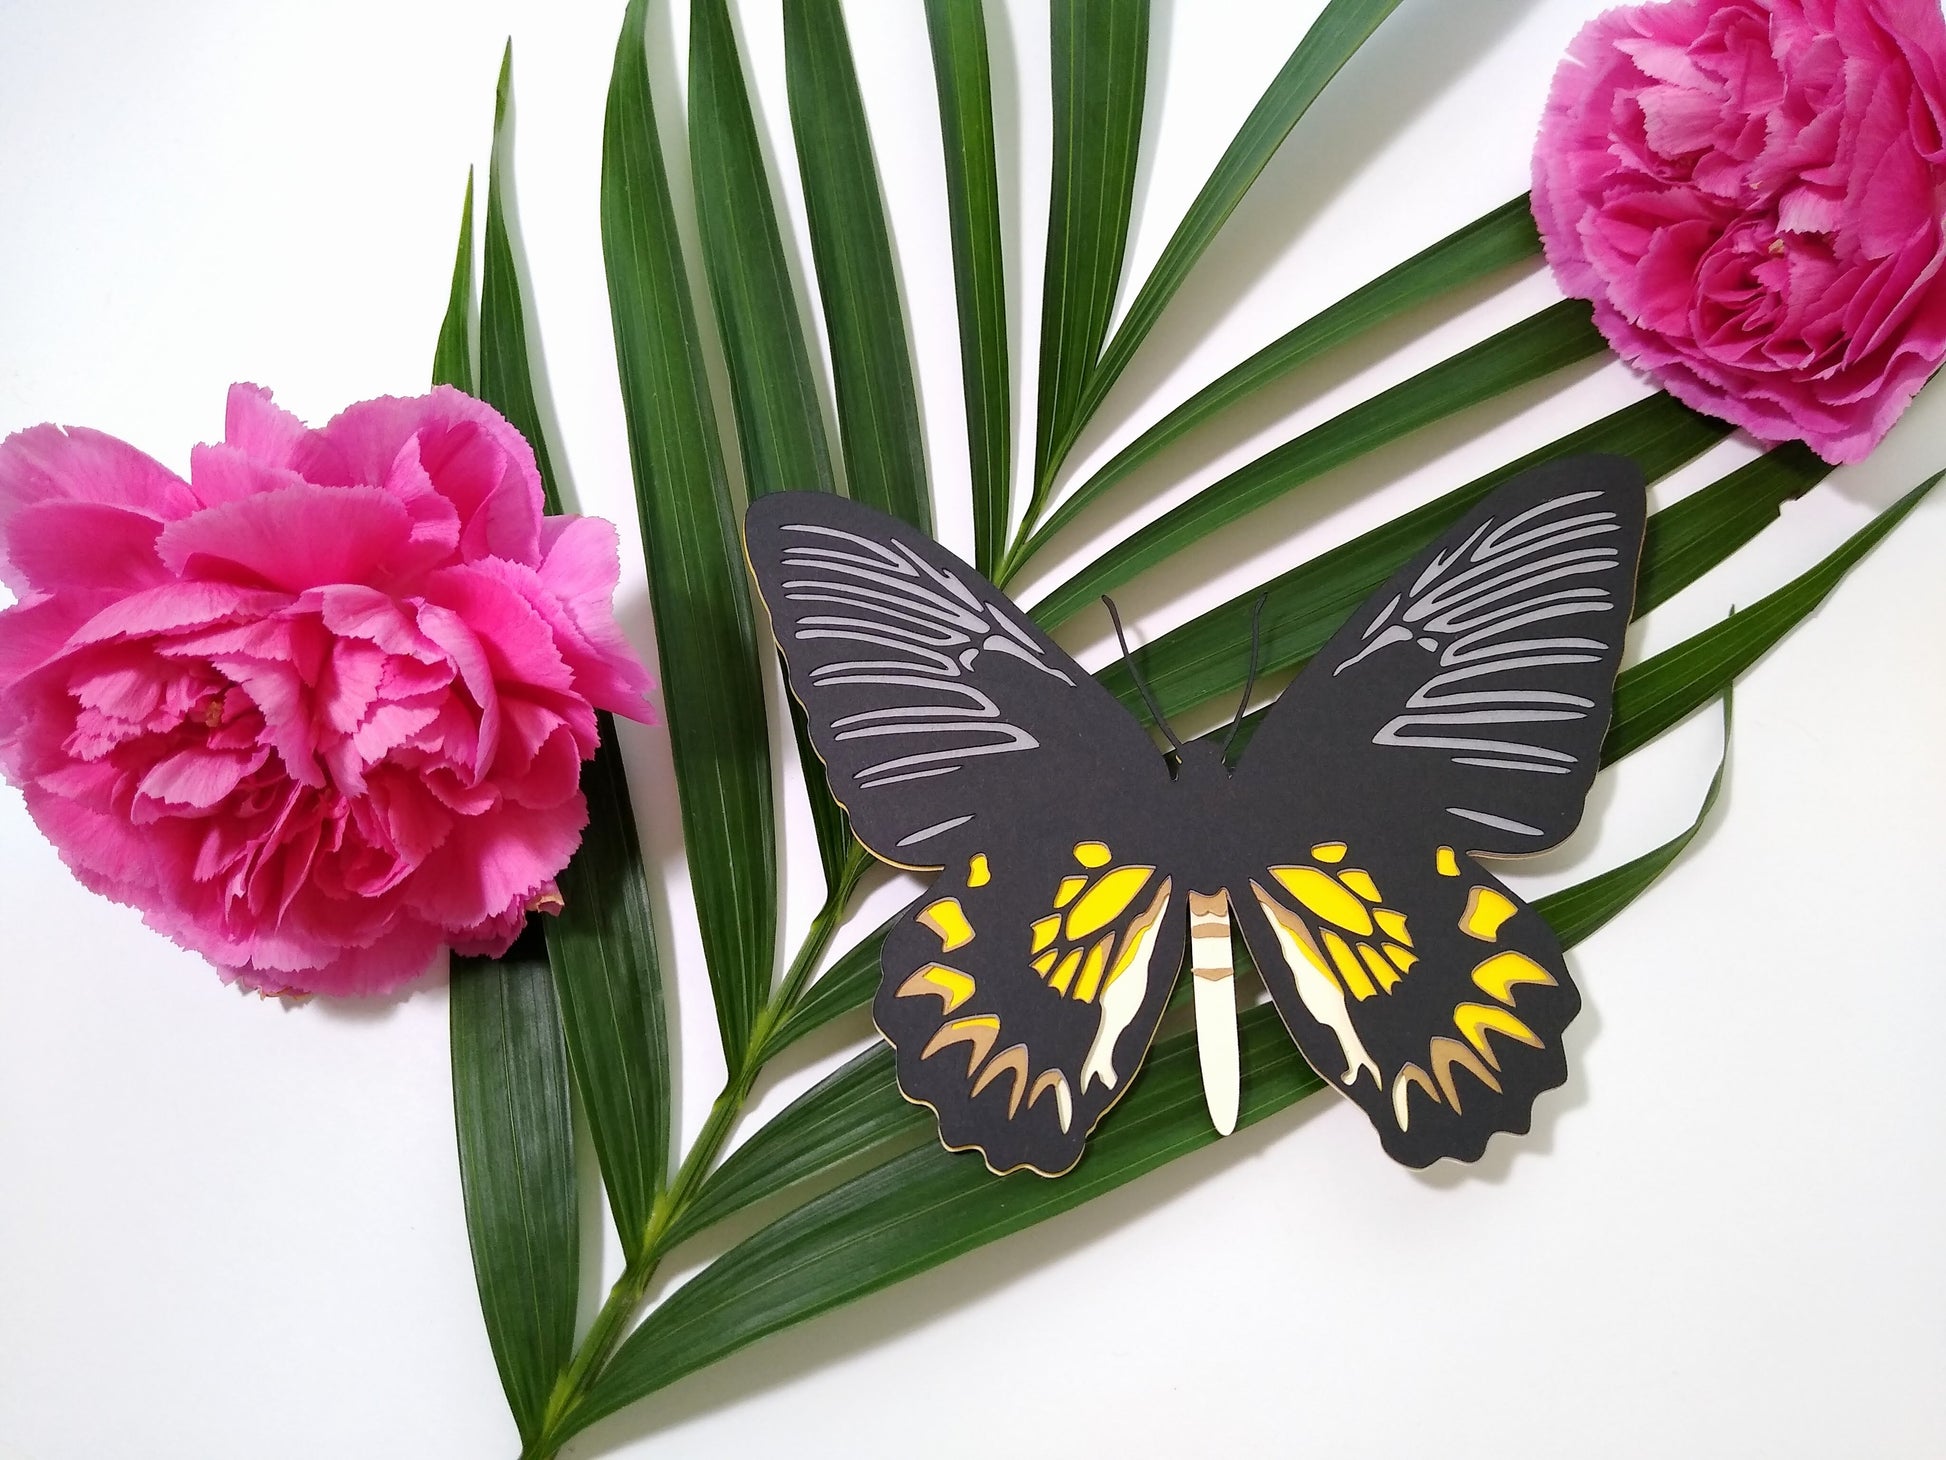 Multi-layered paper butterfly, in the design of a female Magellan Birdwing butterfly. It rests on a large sprig of leaves and beside two pink flowers.